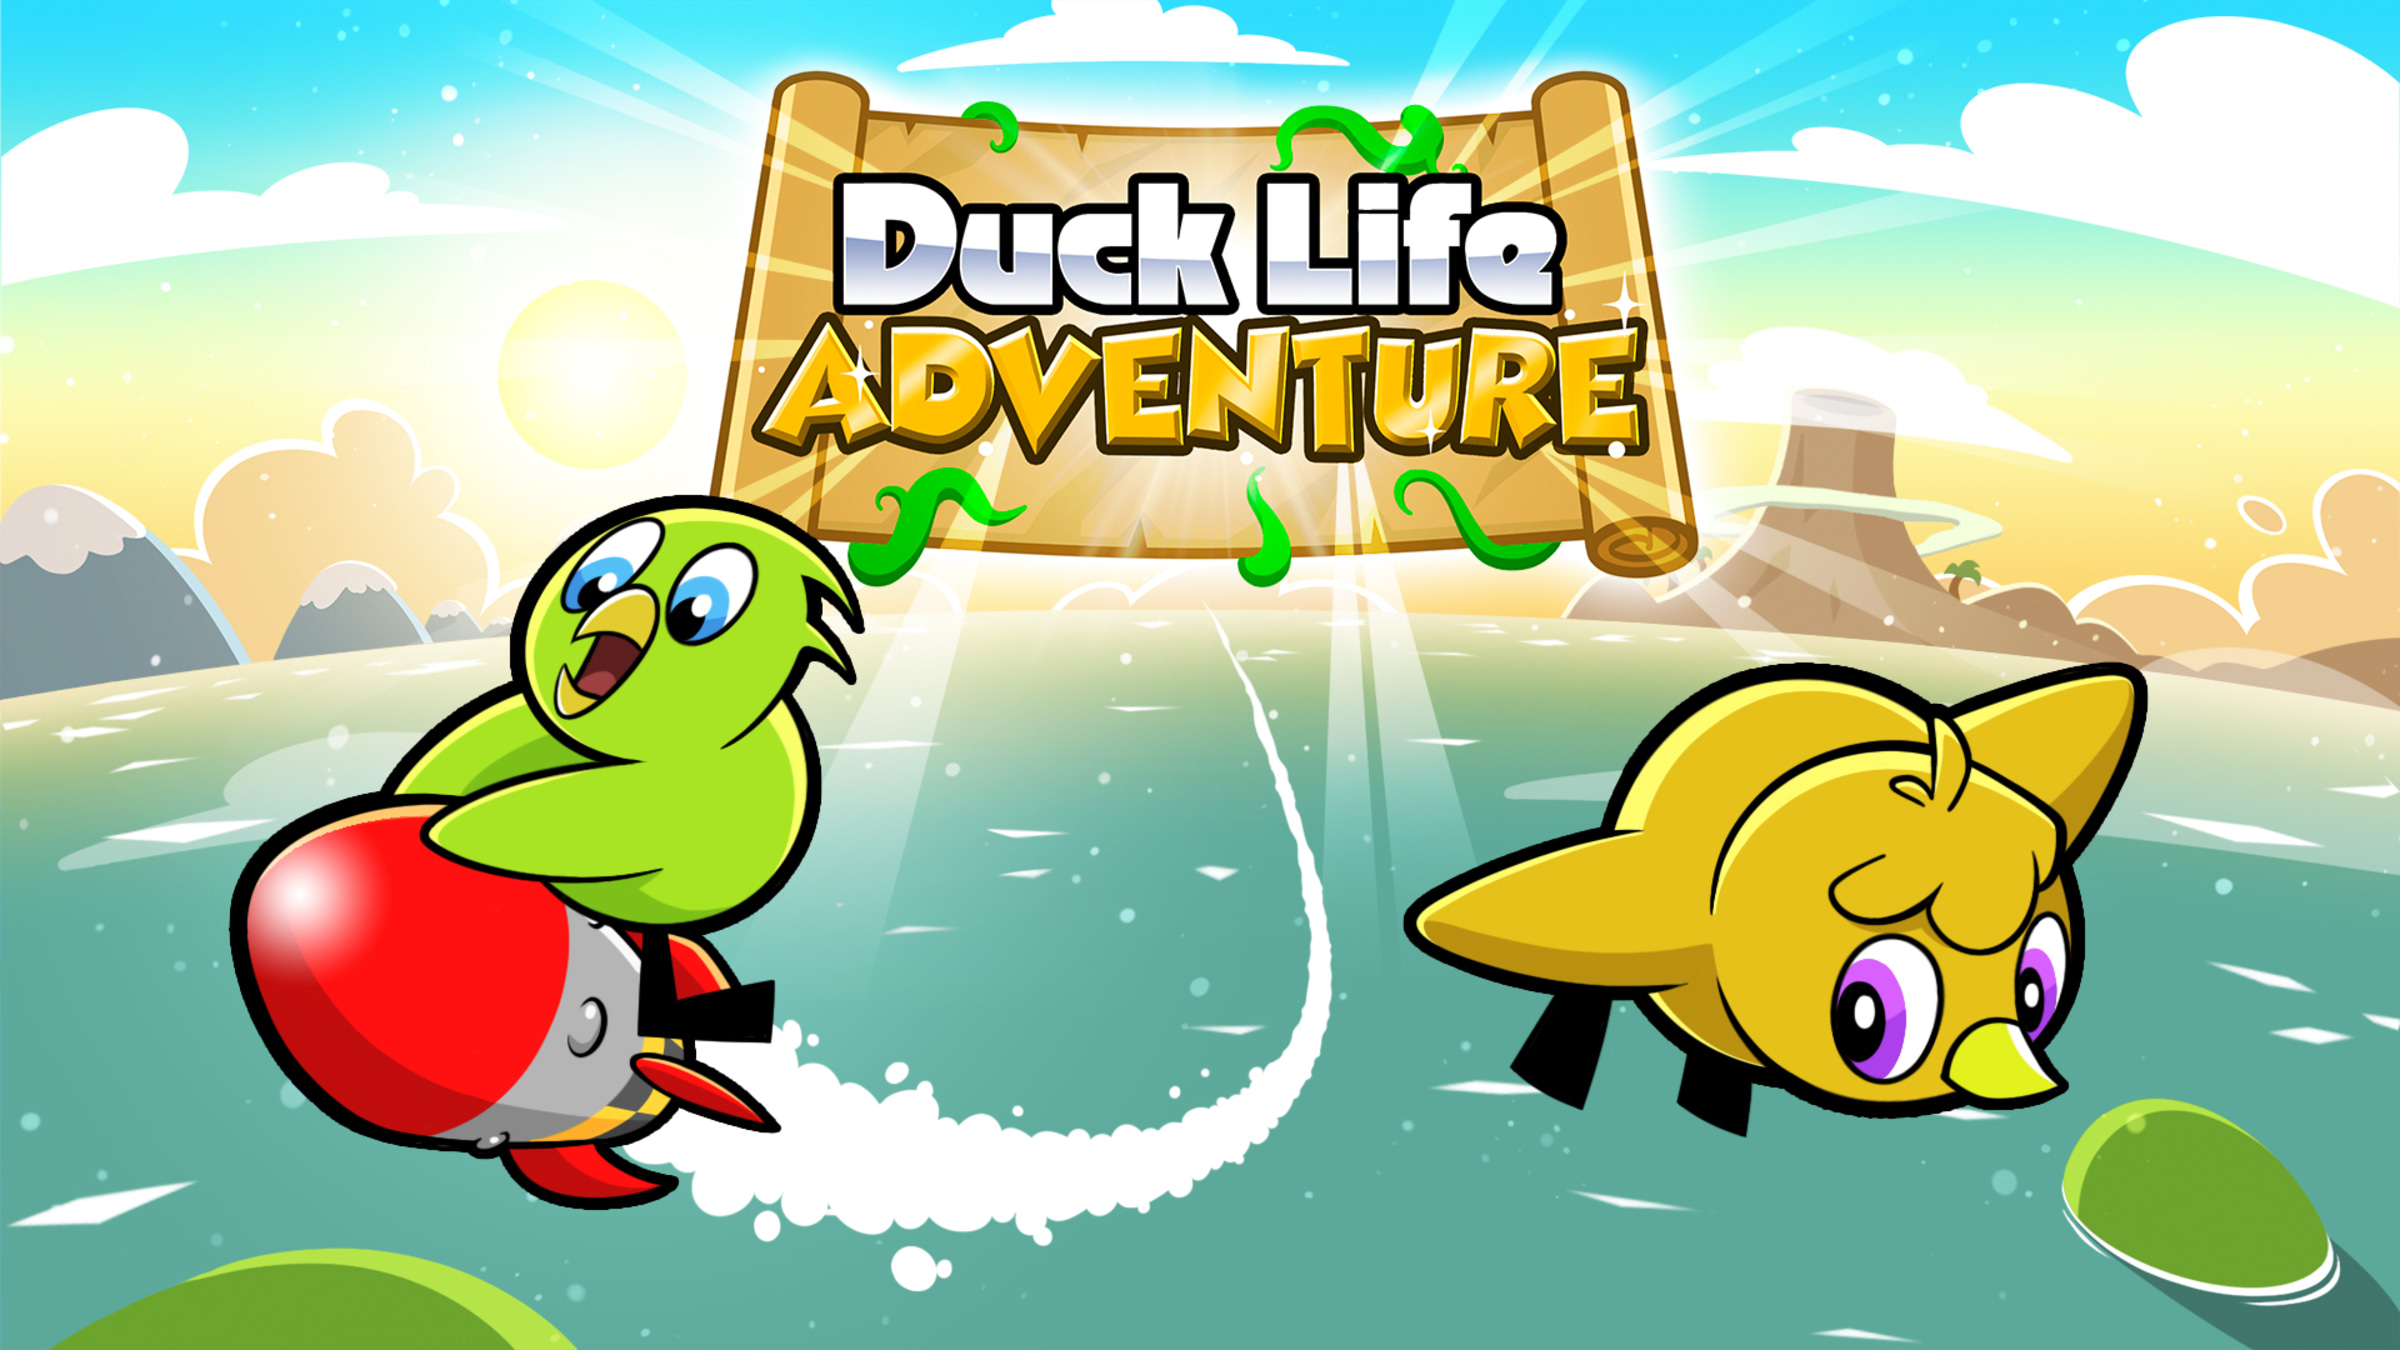 Duck life 3 - LEARN TO FLY 2